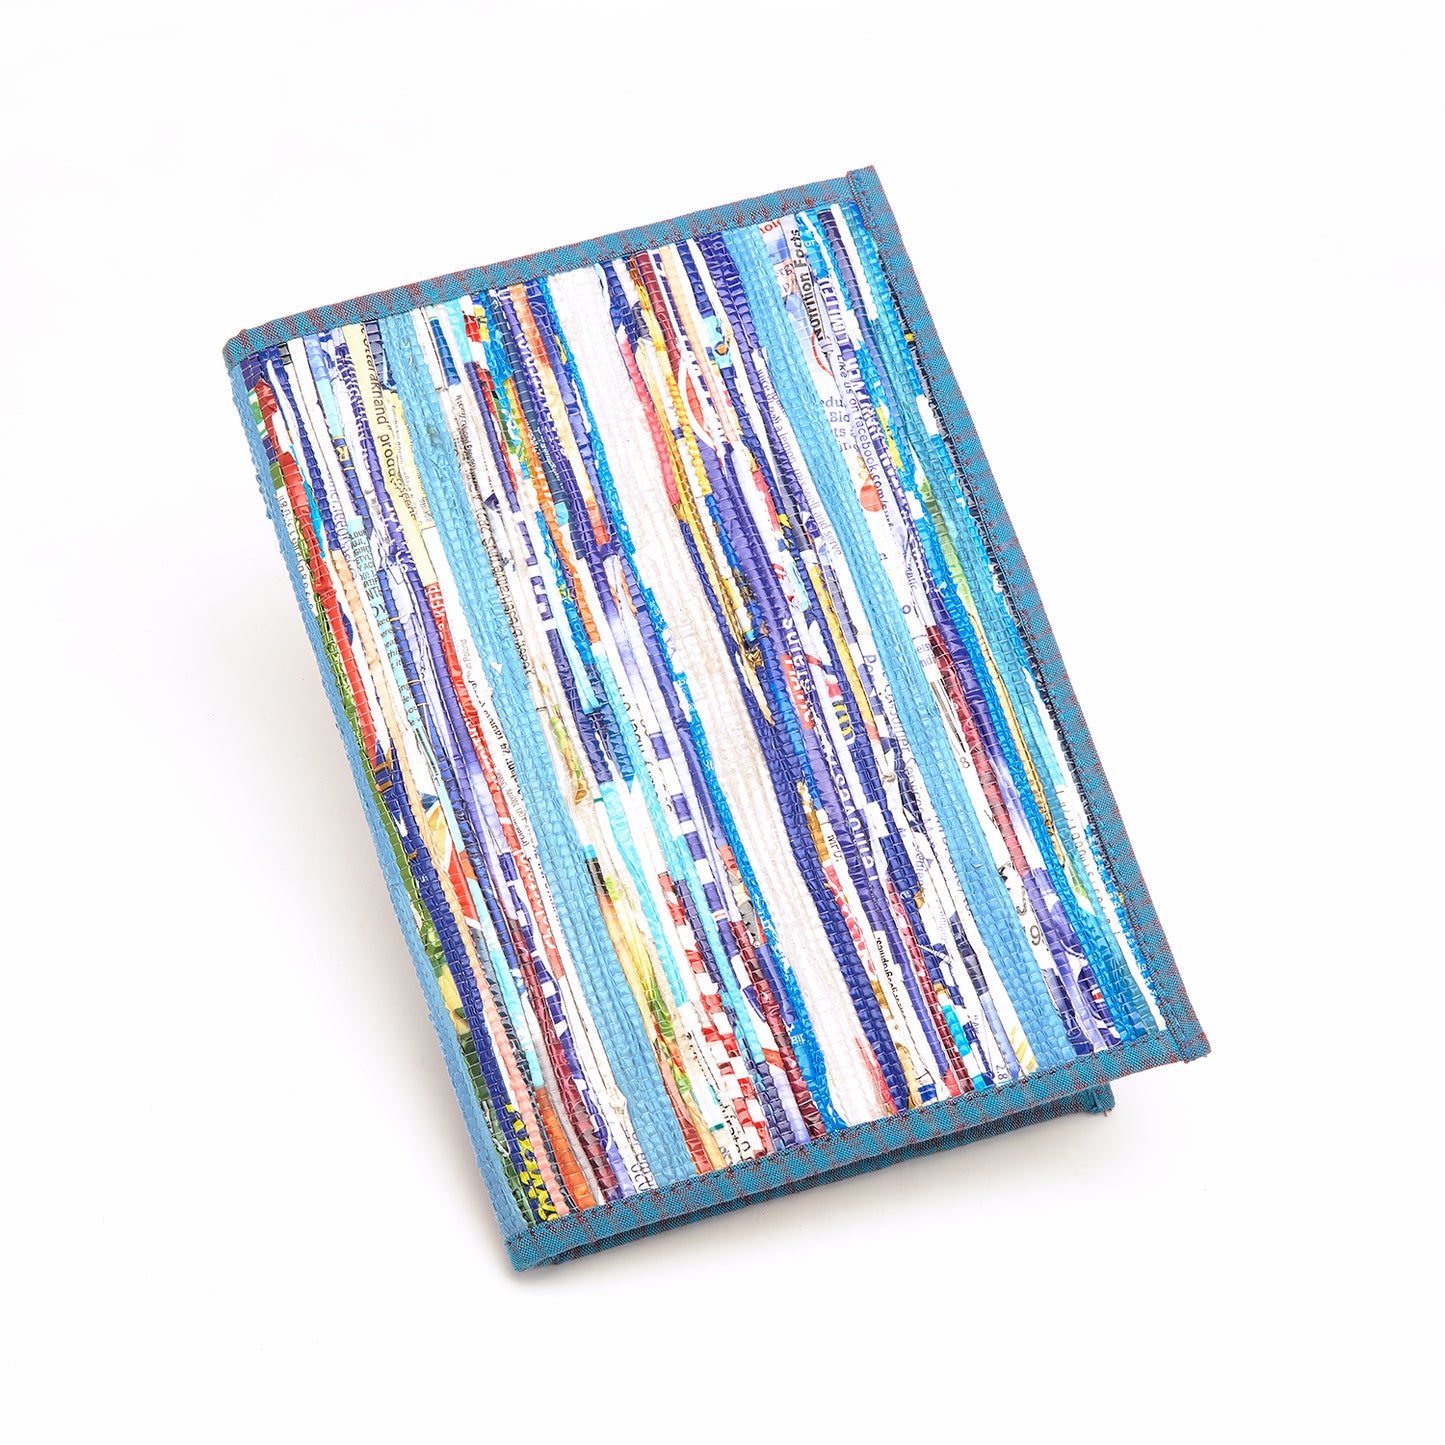 Vibrant mix of Blues, Recycled Plastics (MLP) Diary Cover